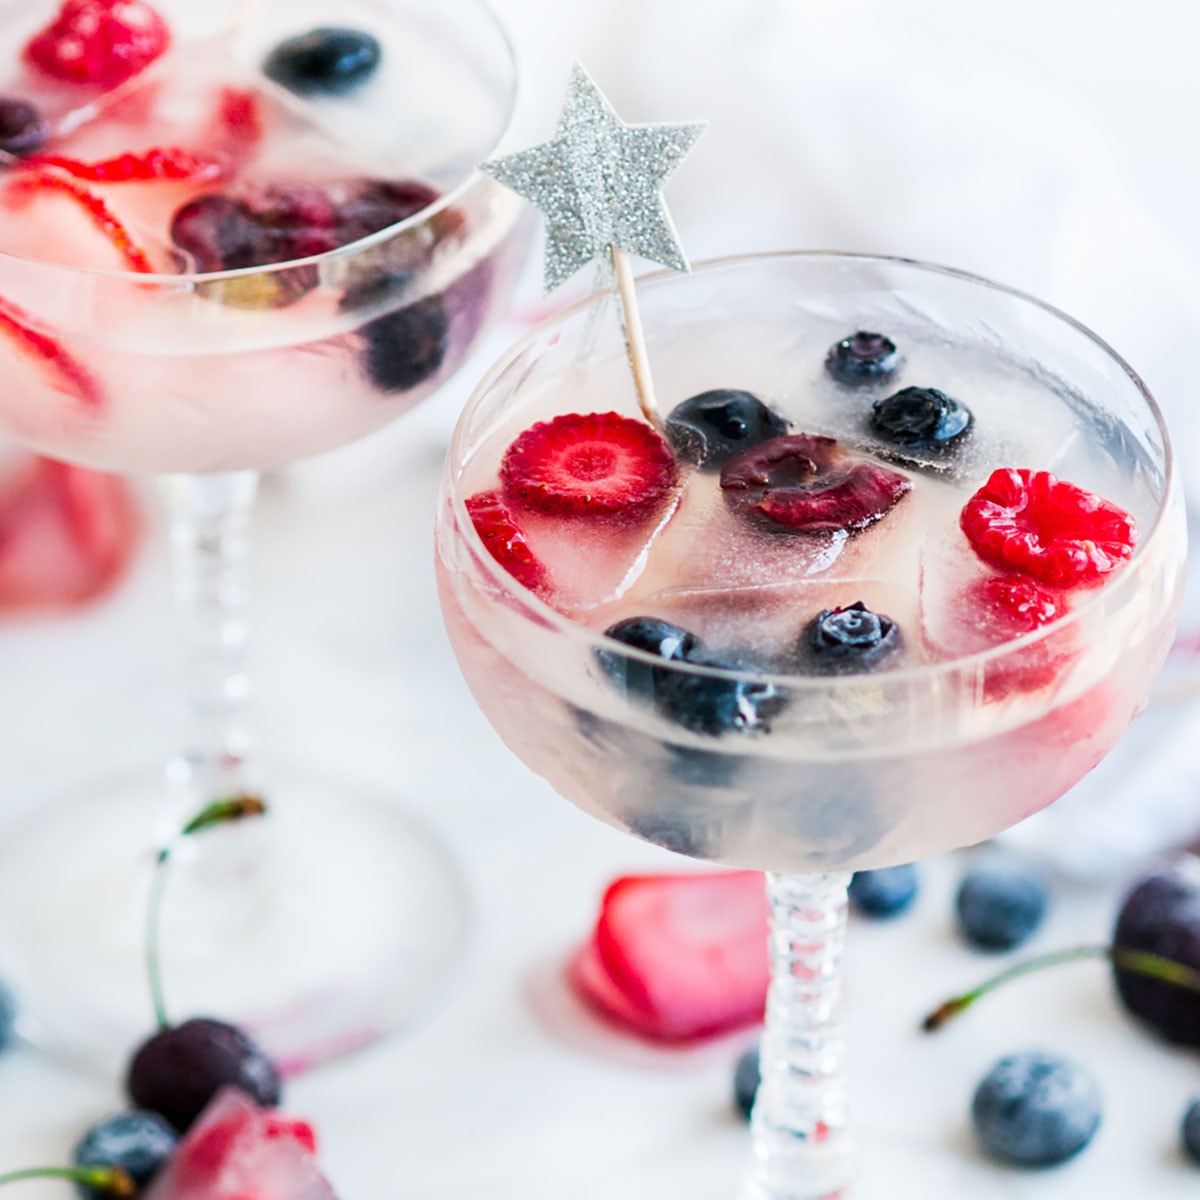 https://www.aberdeenskitchen.com/wp-content/uploads/2017/07/Coconut-Daiquiris-with-Coconut-Water-Berry-Ice-Cubes-7-FI-Thumbnail-1200X1200.jpg